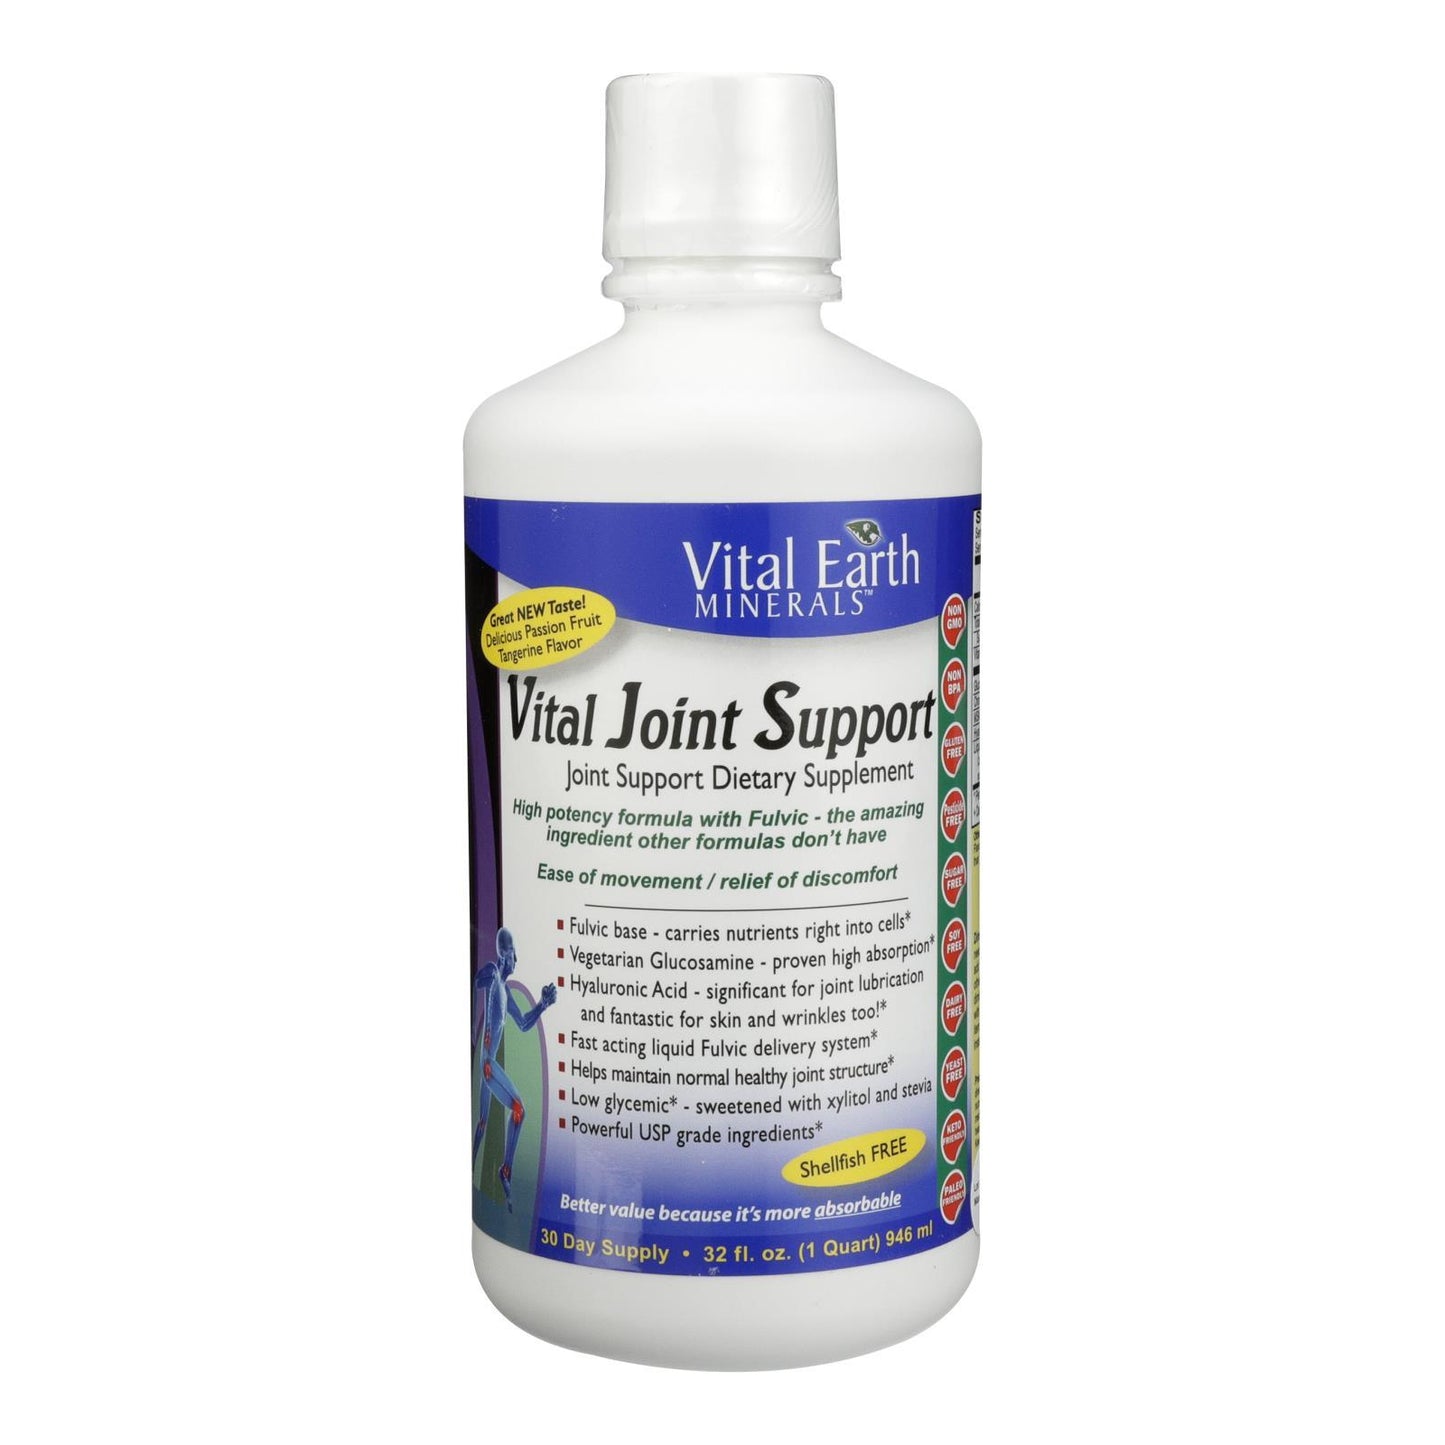 Vital Earth Minerals - Vital Joint Support - 1 Each - 32 Oz